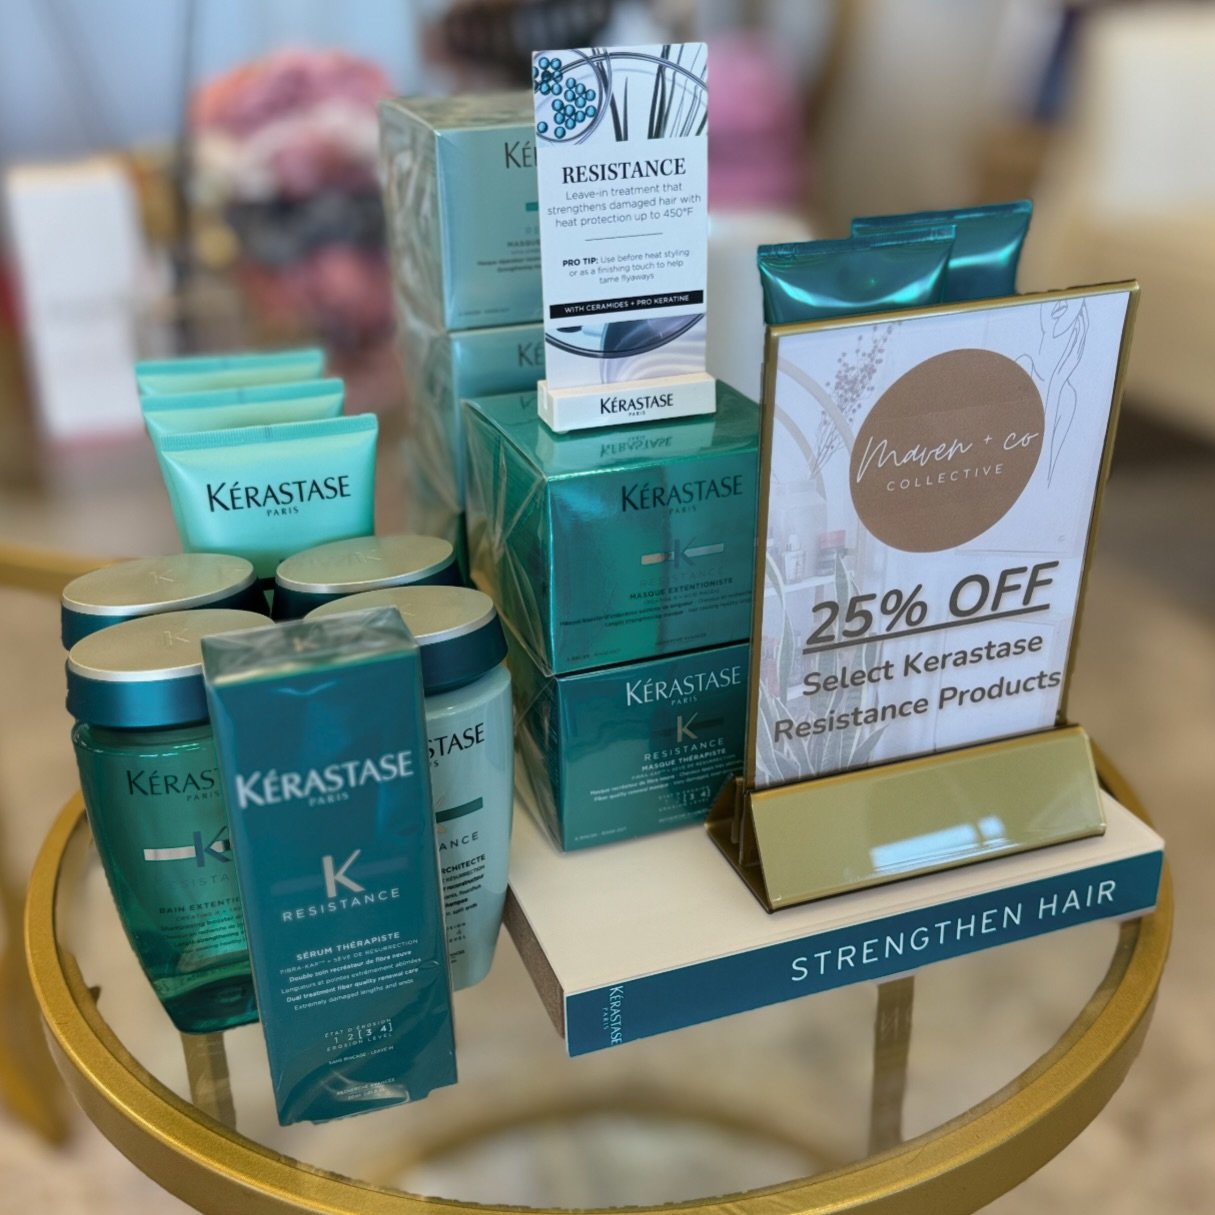 Ready, set- SALE!

Treat yourself to select products from the @kerastase_official  Resistance range, all for 25% off! 

Need to know if these products are right for you? Take the quiz in the link in our bio to find out!